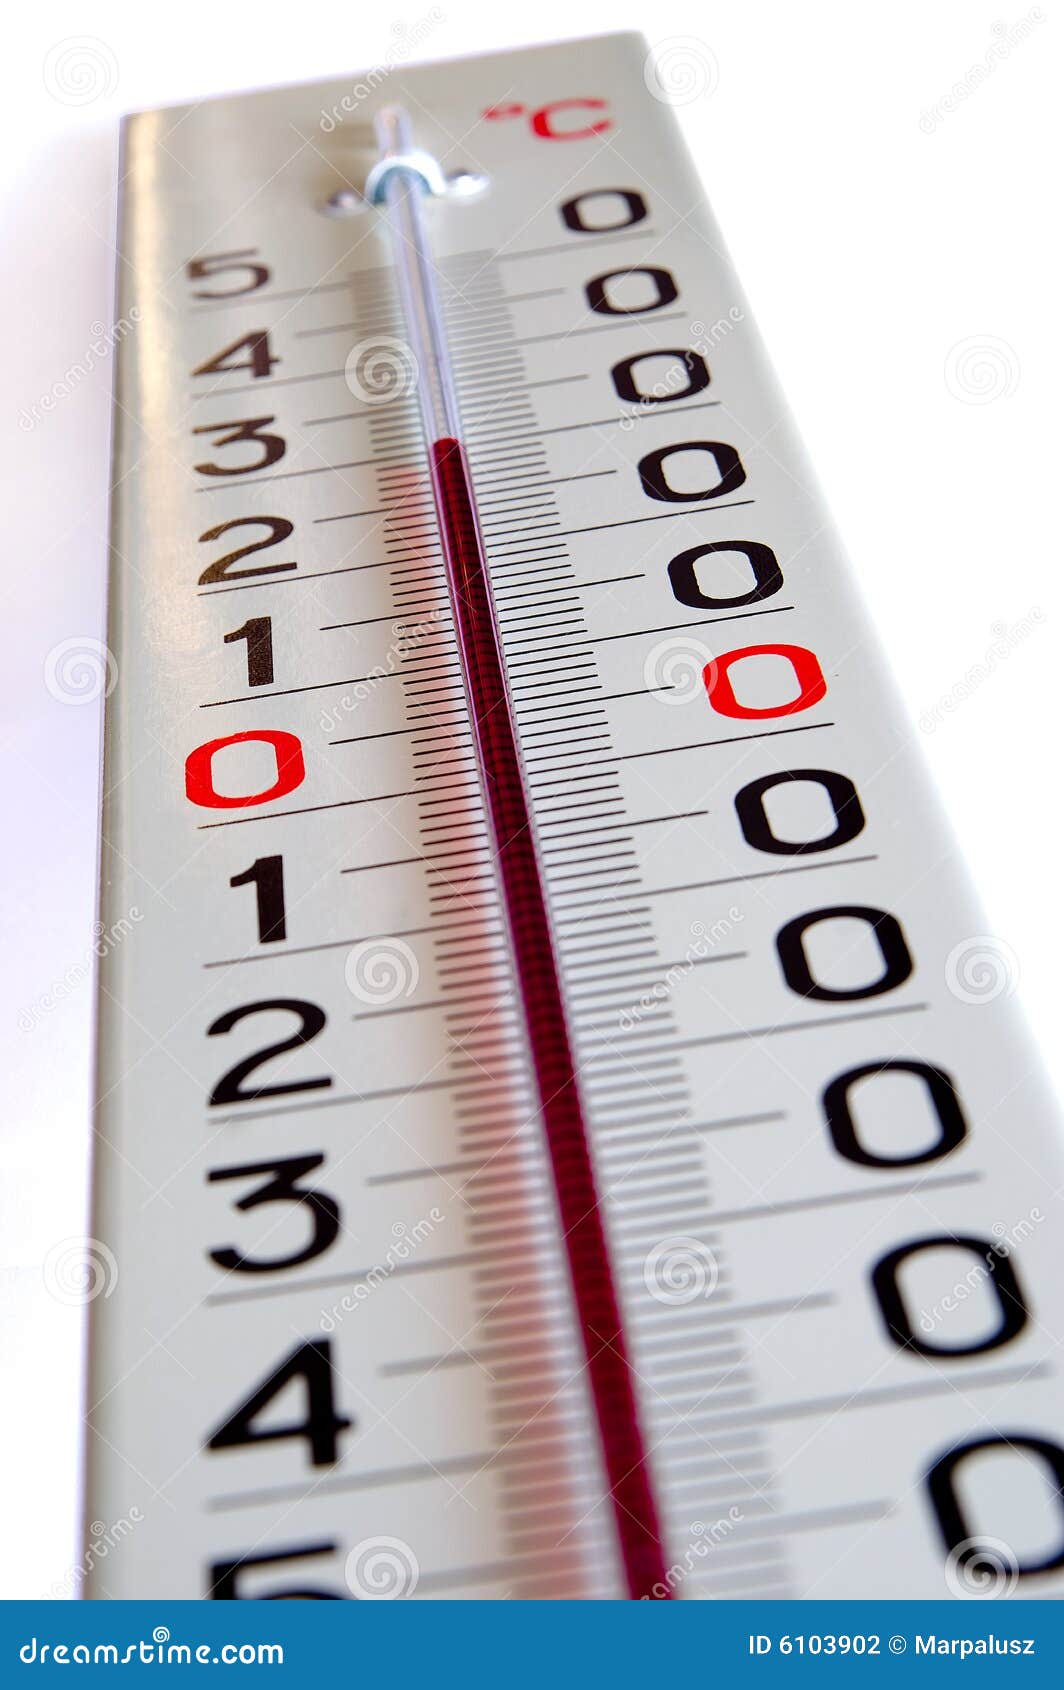 https://thumbs.dreamstime.com/z/big-outside-thermometer-6103902.jpg